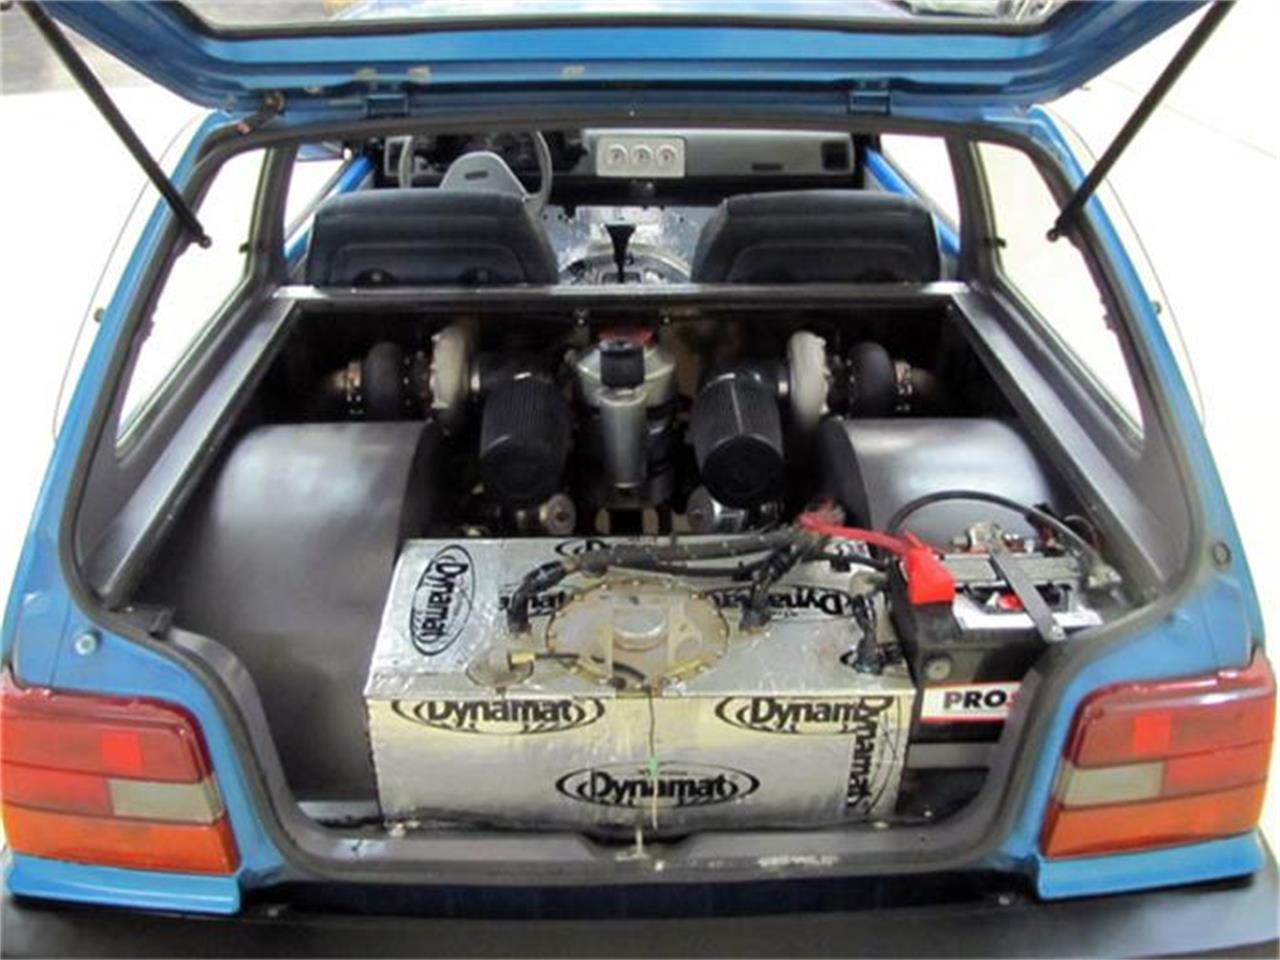 For Sale: 1988 Chevrolet Sprint with a 1,300 HP Twin-turbo ... wiring harness geo metro 